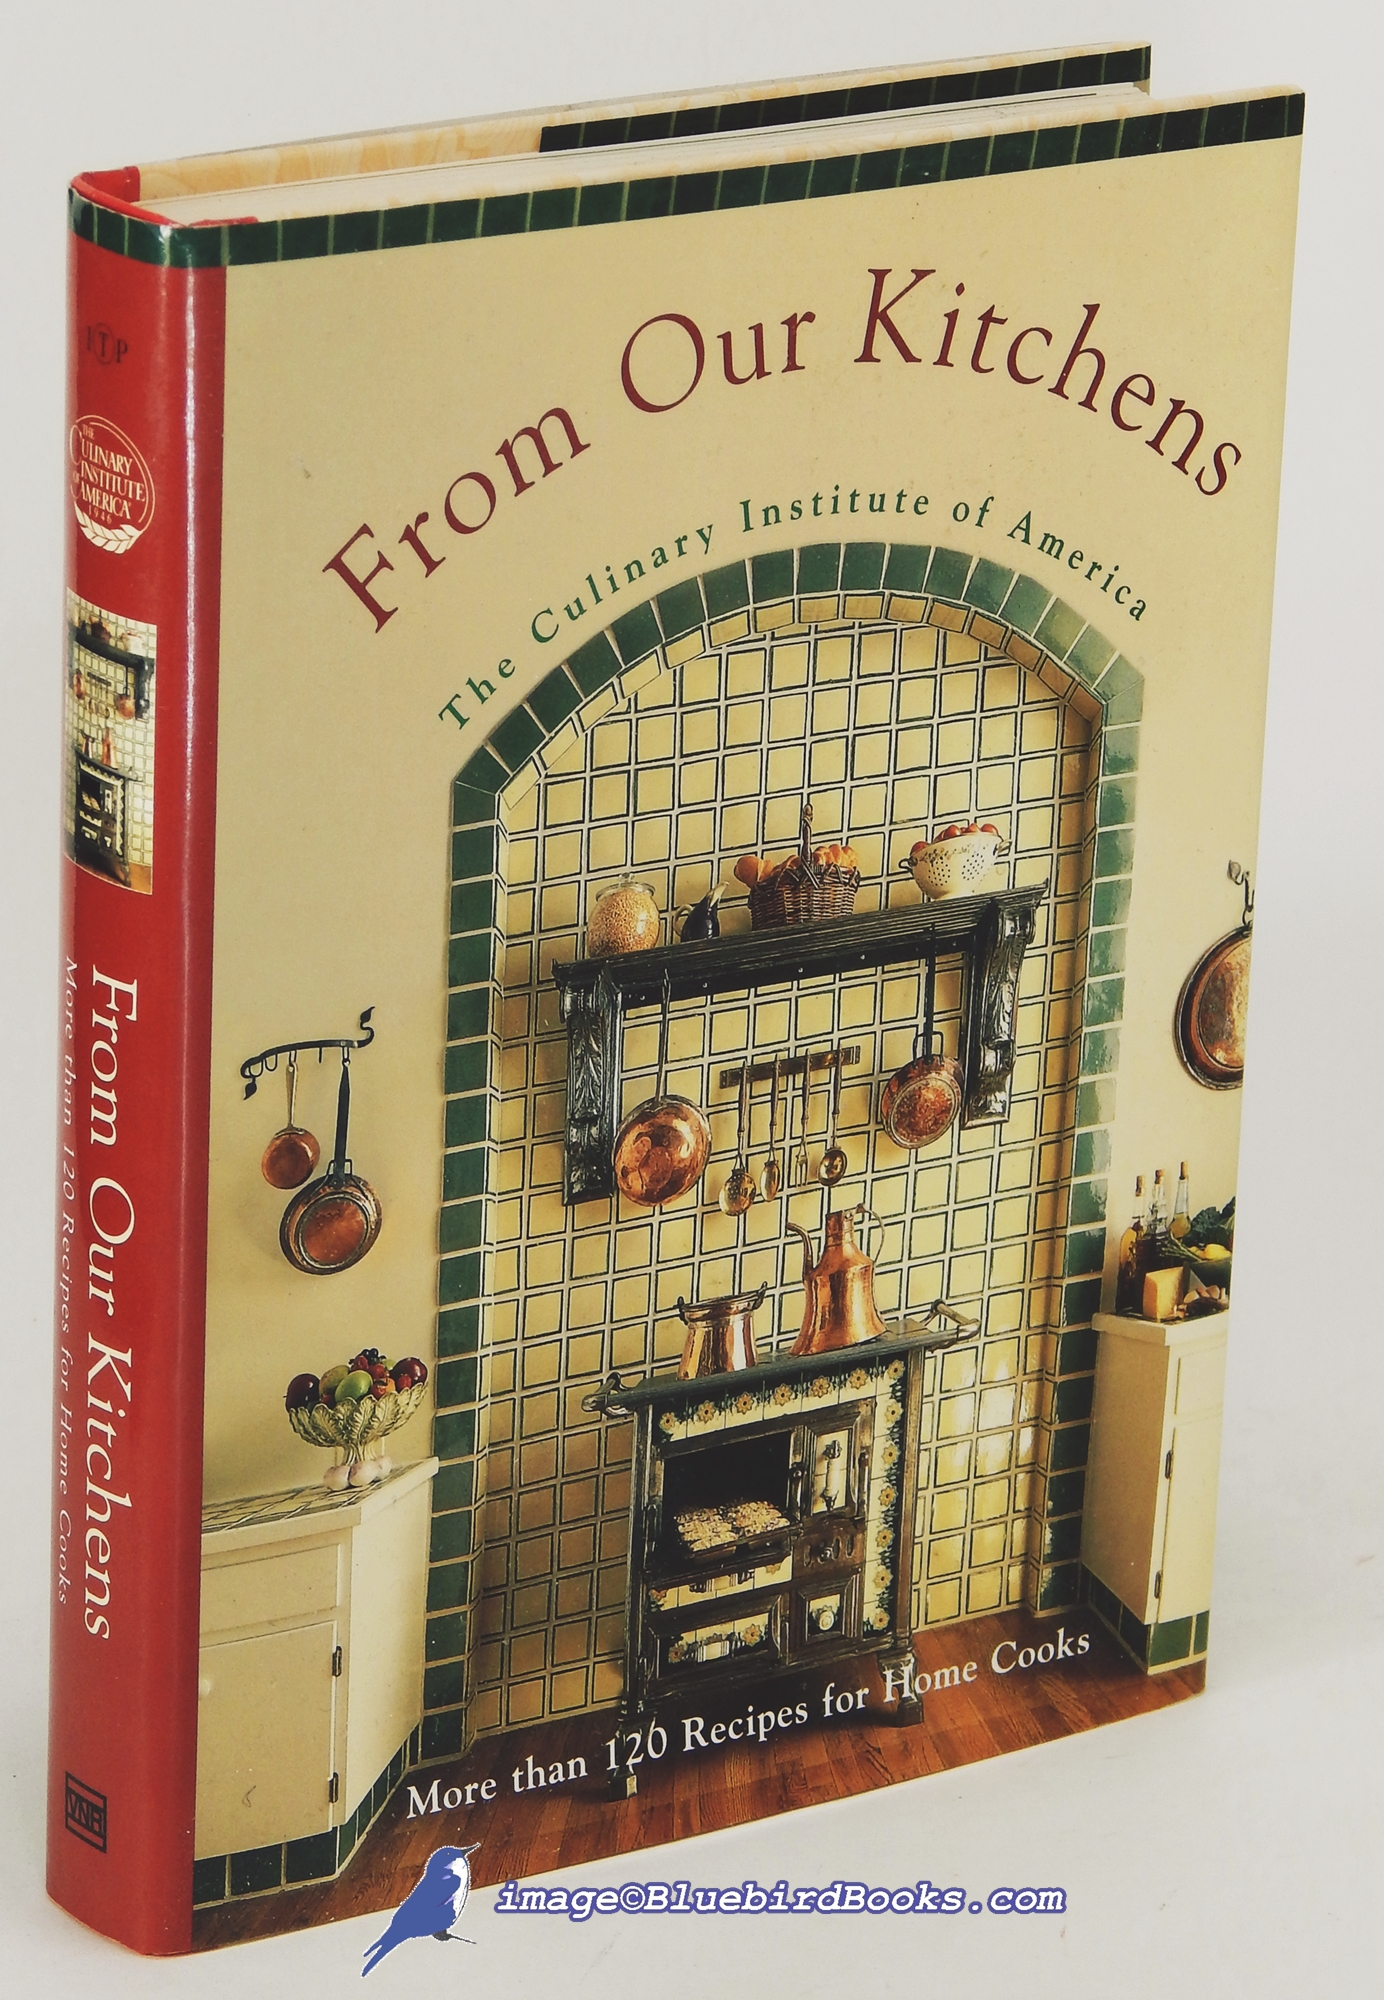 DONOVAN, MARY DEIRDRE (EDITOR) - From Our Kitchens: The Culinary Institute of America